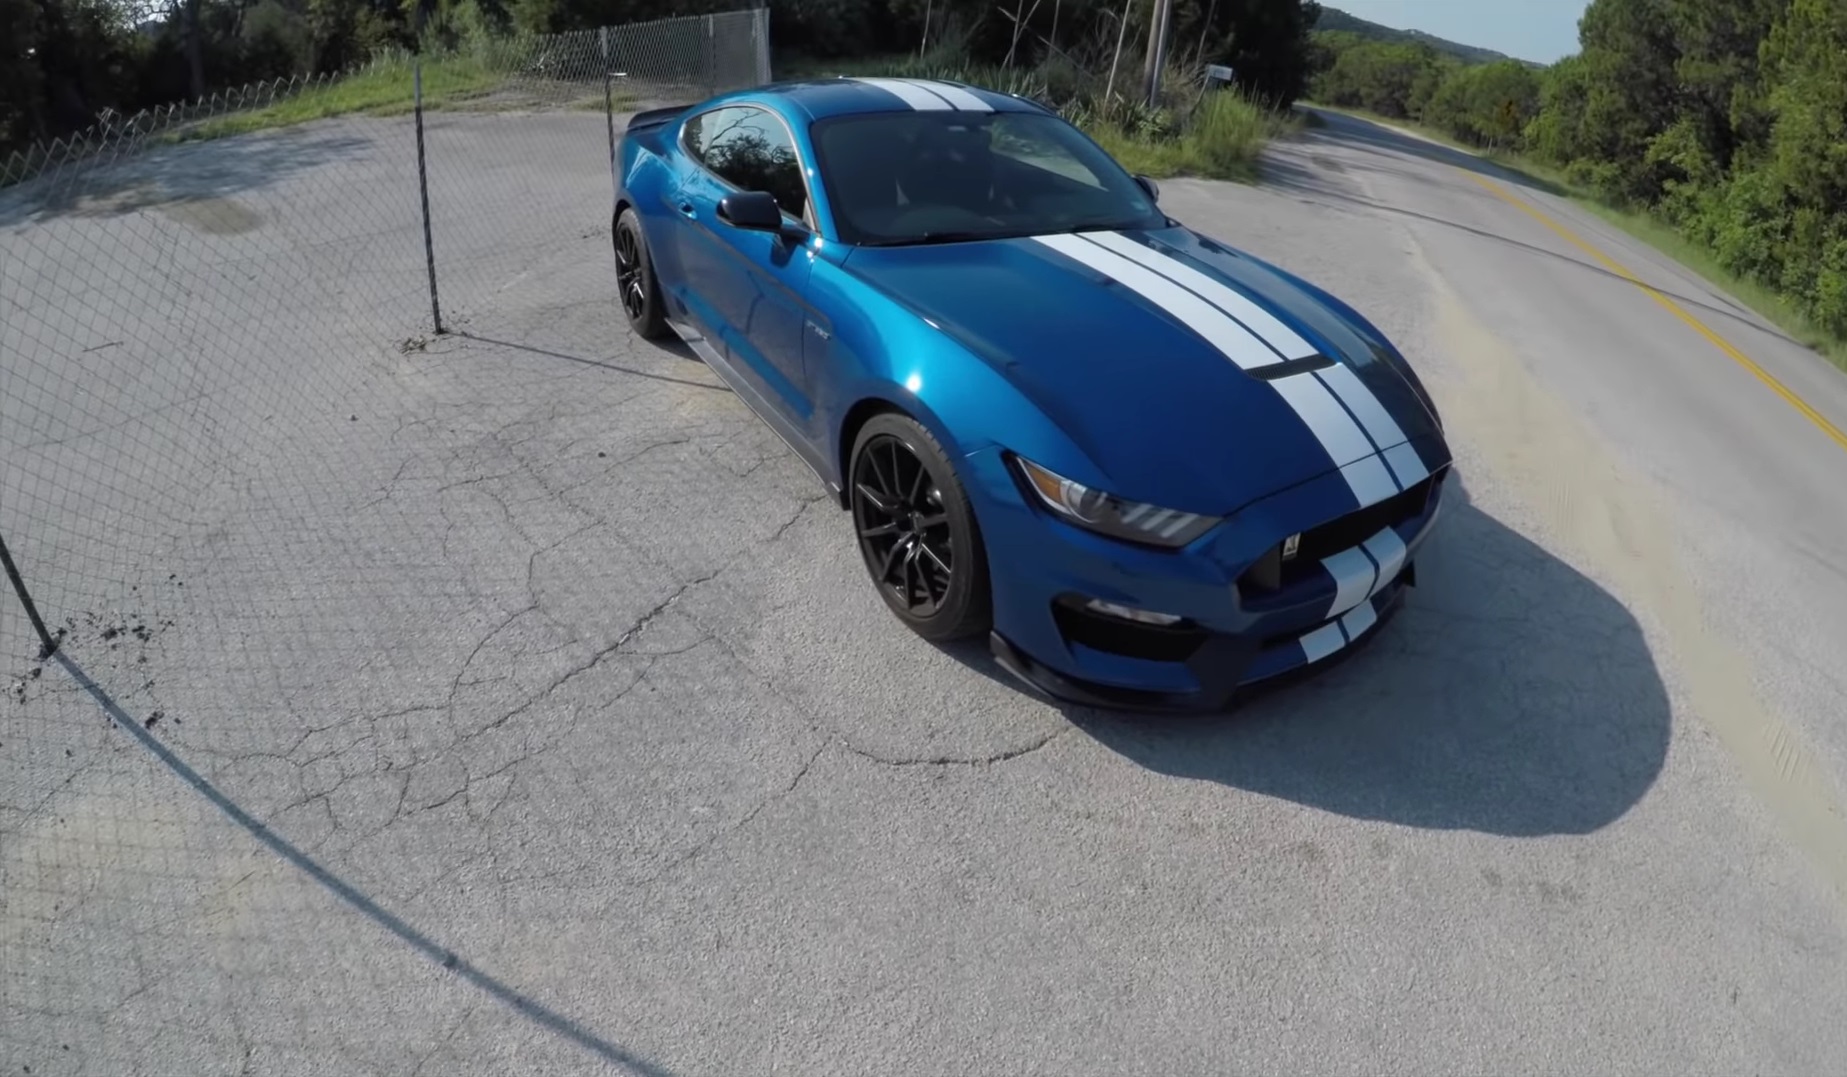 Video: 2017 Ford Mustang Shelby GT350 POV Drive